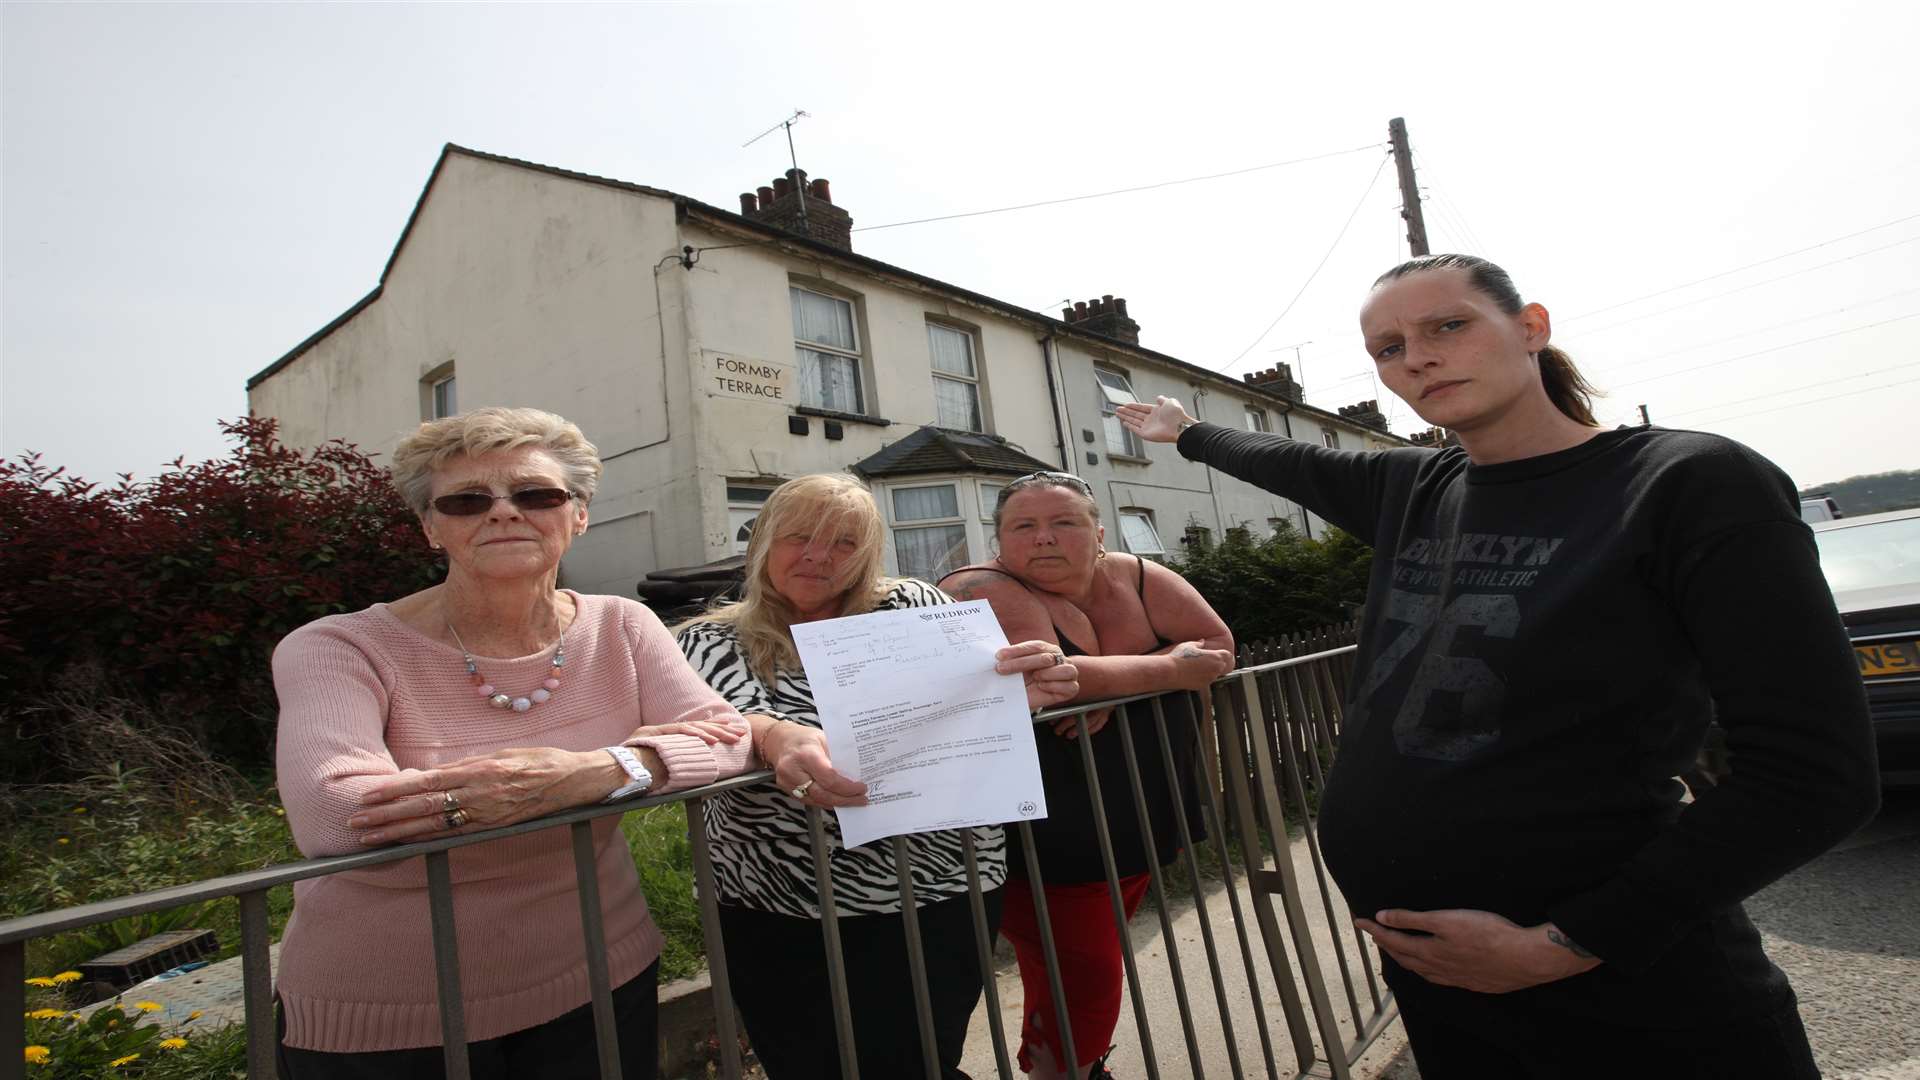 Kayleigh Peachell, in front, and nearly eight months pregnant with other families who live in Formby Terrace.